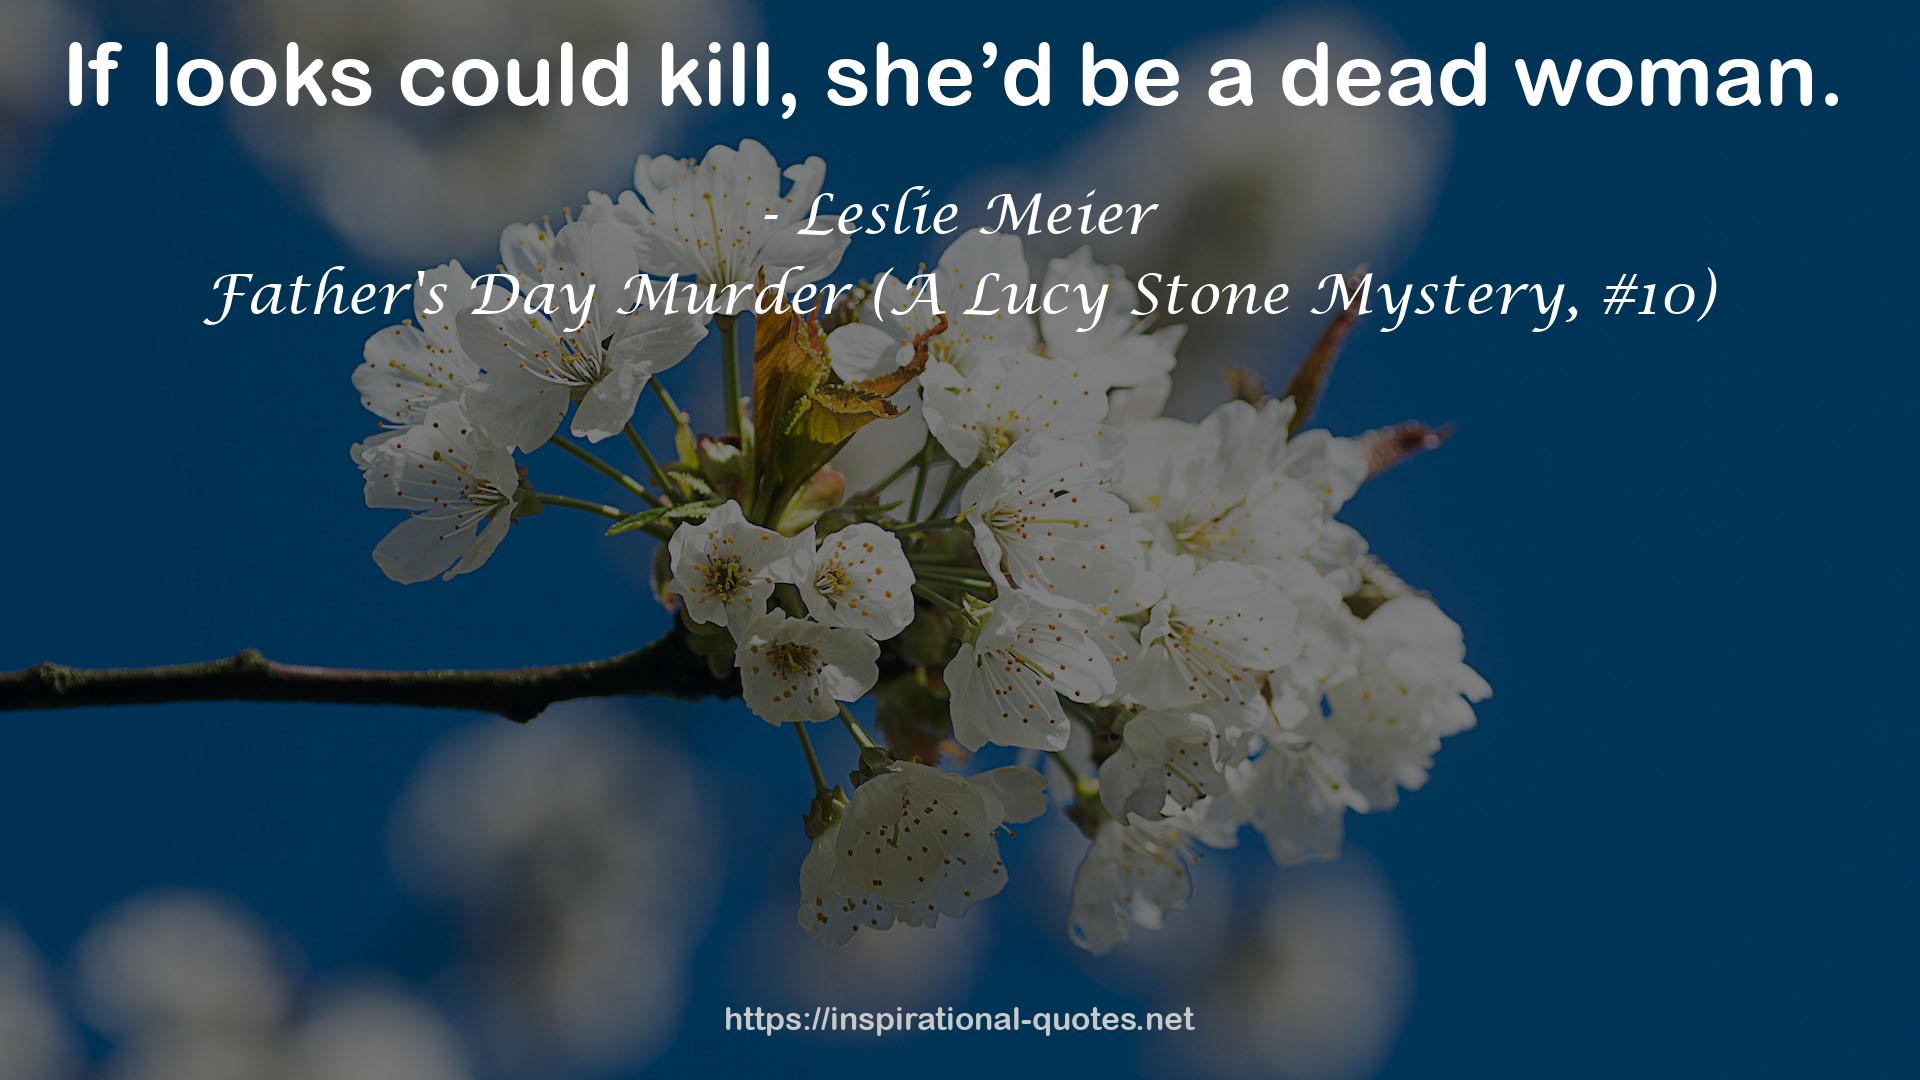 Father's Day Murder (A Lucy Stone Mystery, #10) QUOTES